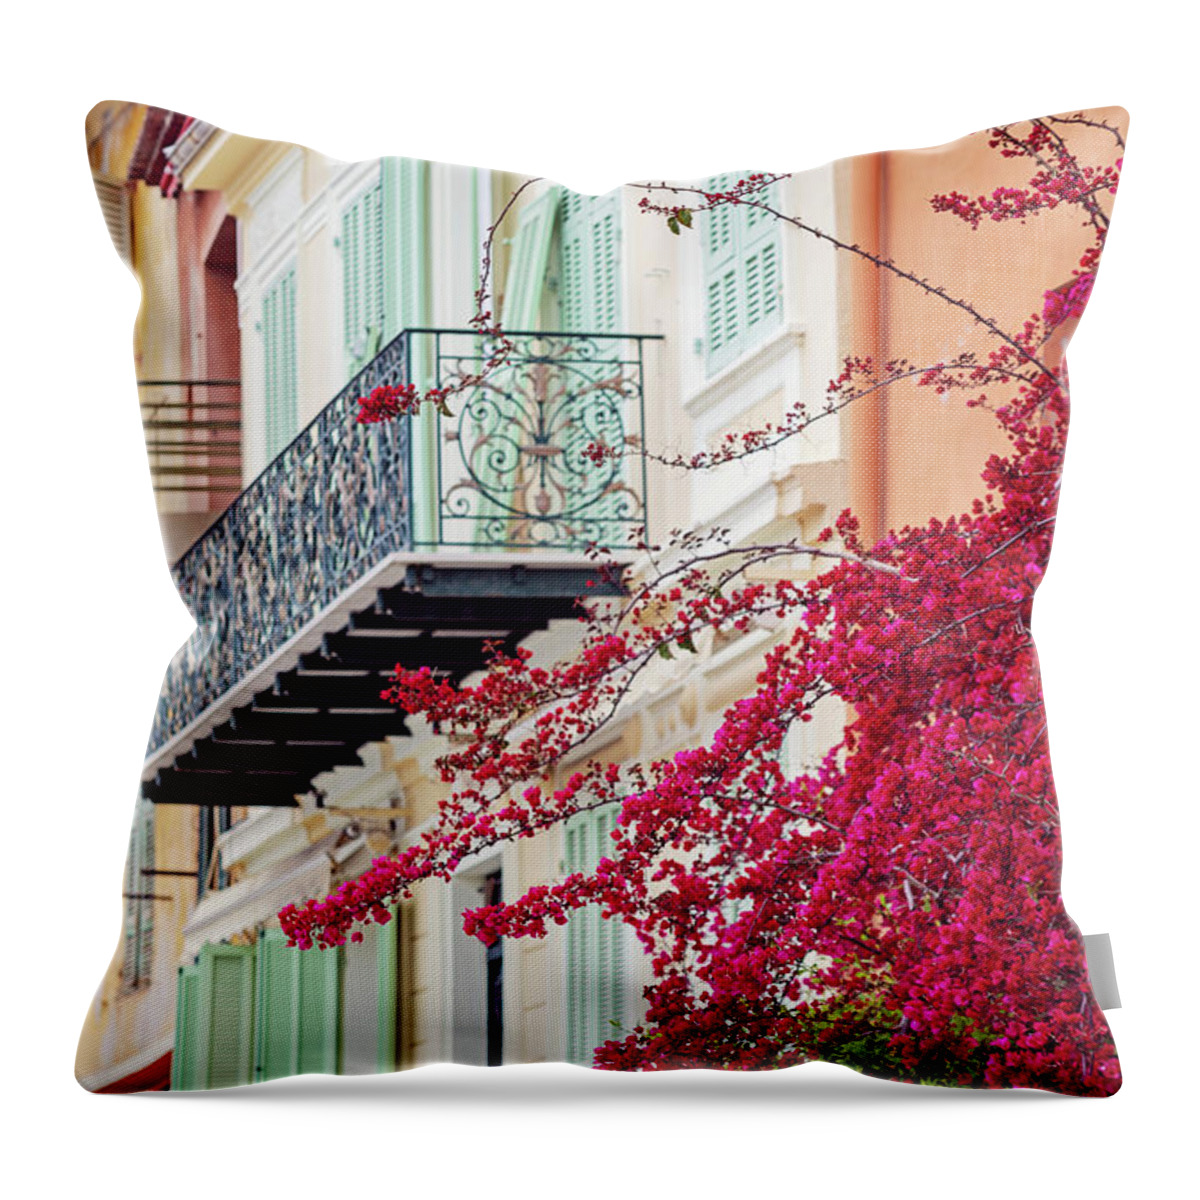 Bougainvillea Throw Pillow featuring the photograph Bougainvillea in Villefranche Sur Mer by Melanie Alexandra Price